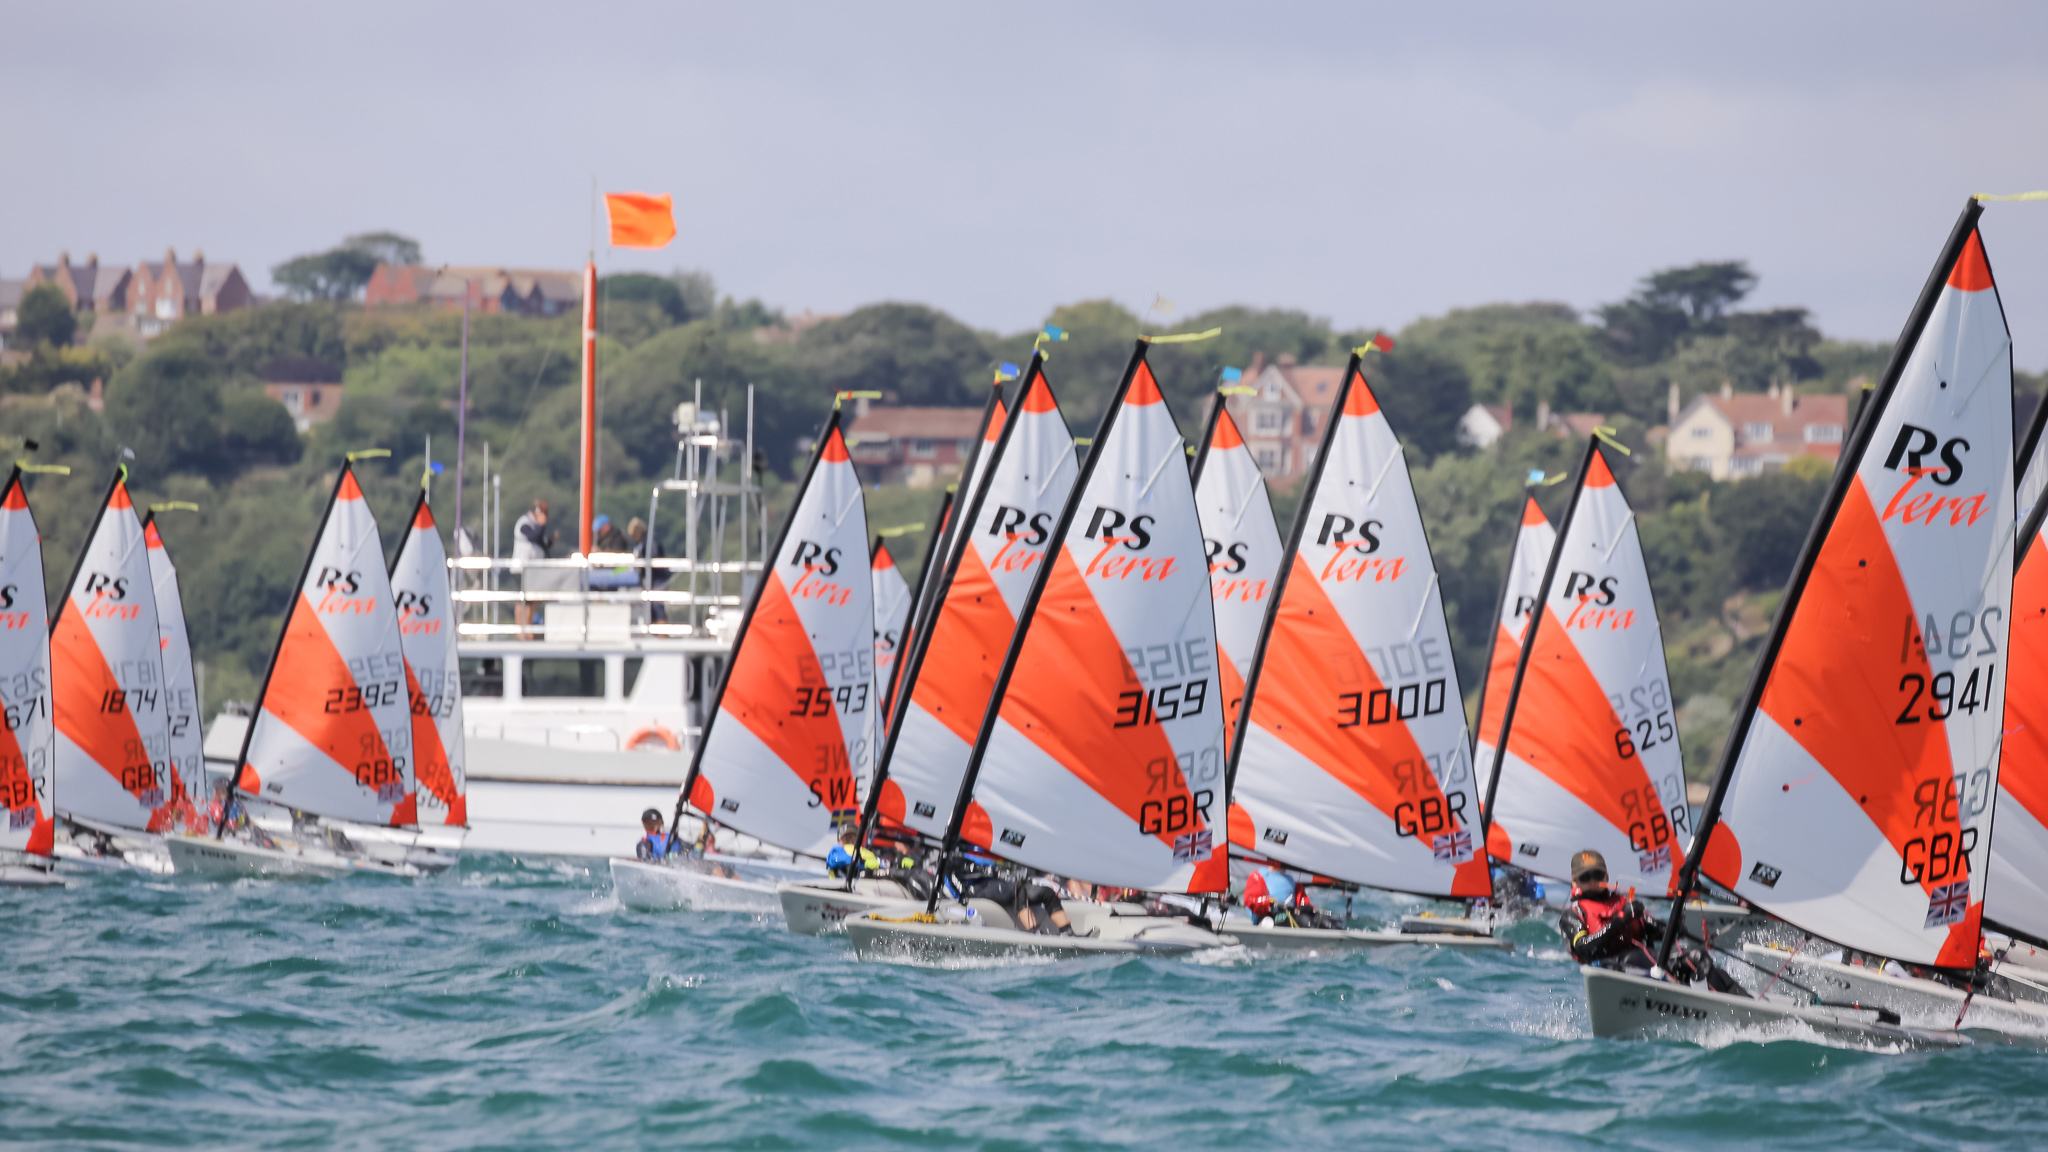 The Tera Worlds Is Coming To Town